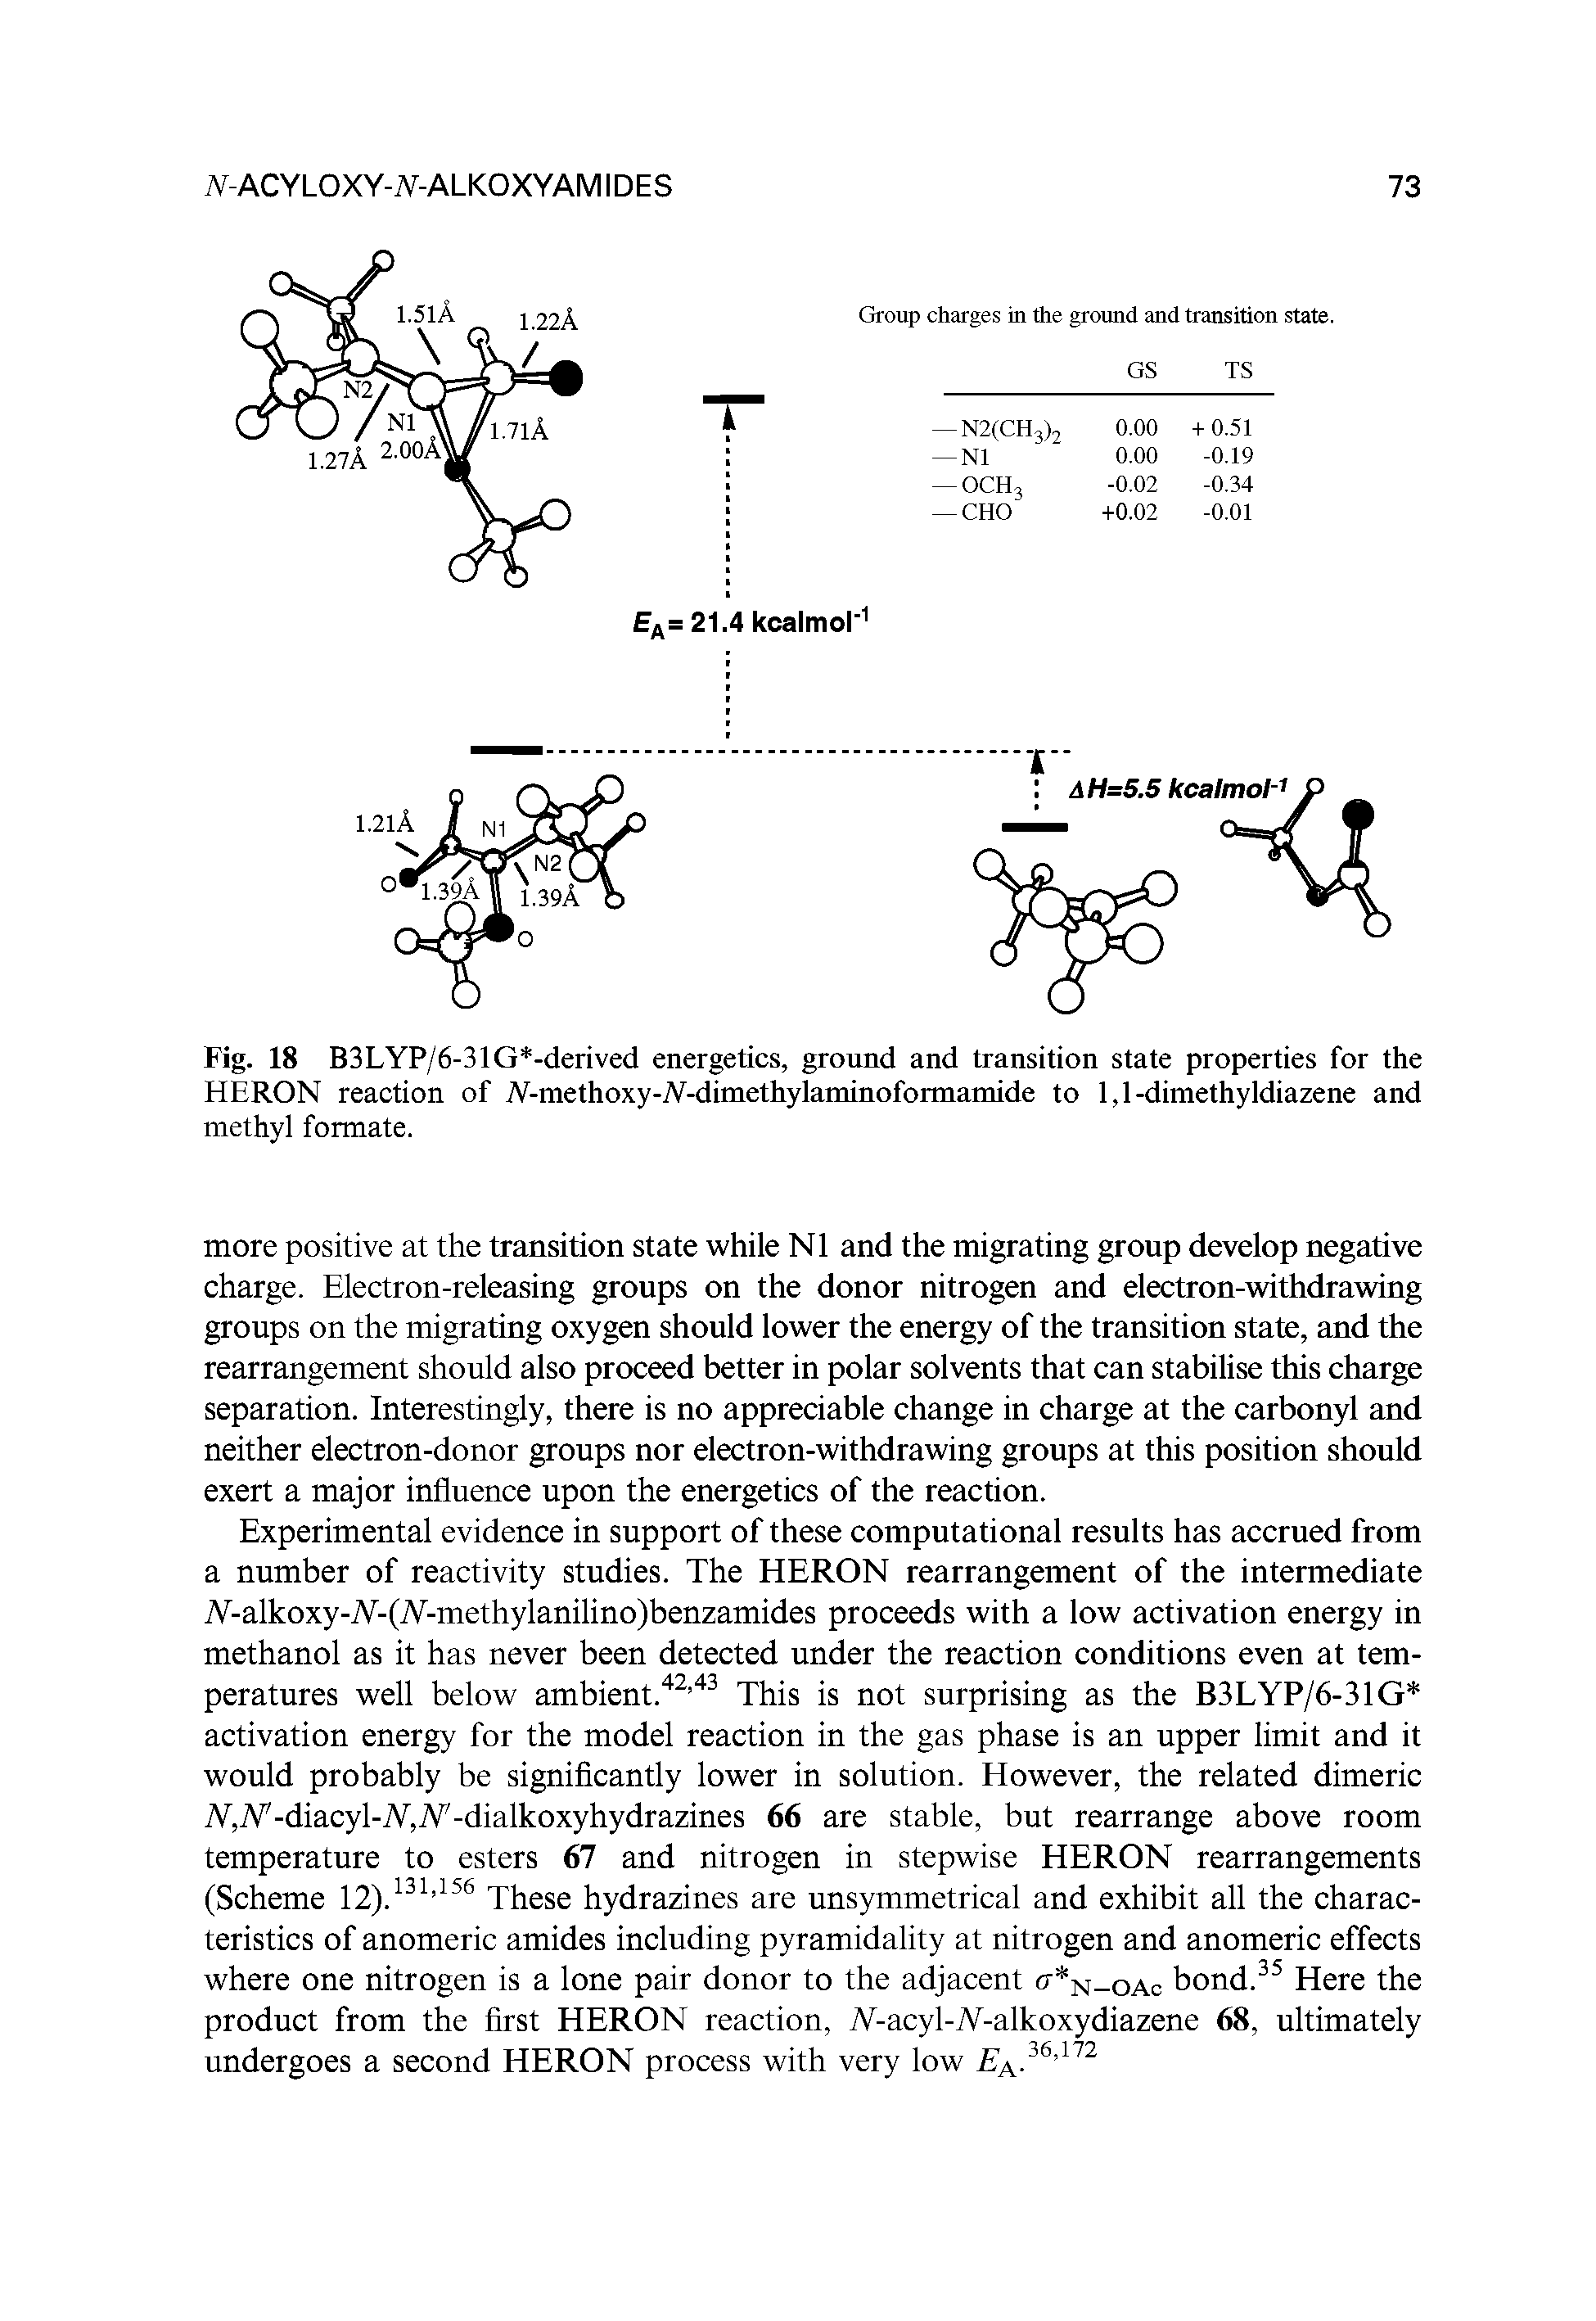 Fig. 18 B3LYP/6-31G -derived energetics, ground and transition state properties for the HERON reaction of iV-methoxy-N-dimethylaminoformamide to 1,1-dimethyldiazene and methyl formate.